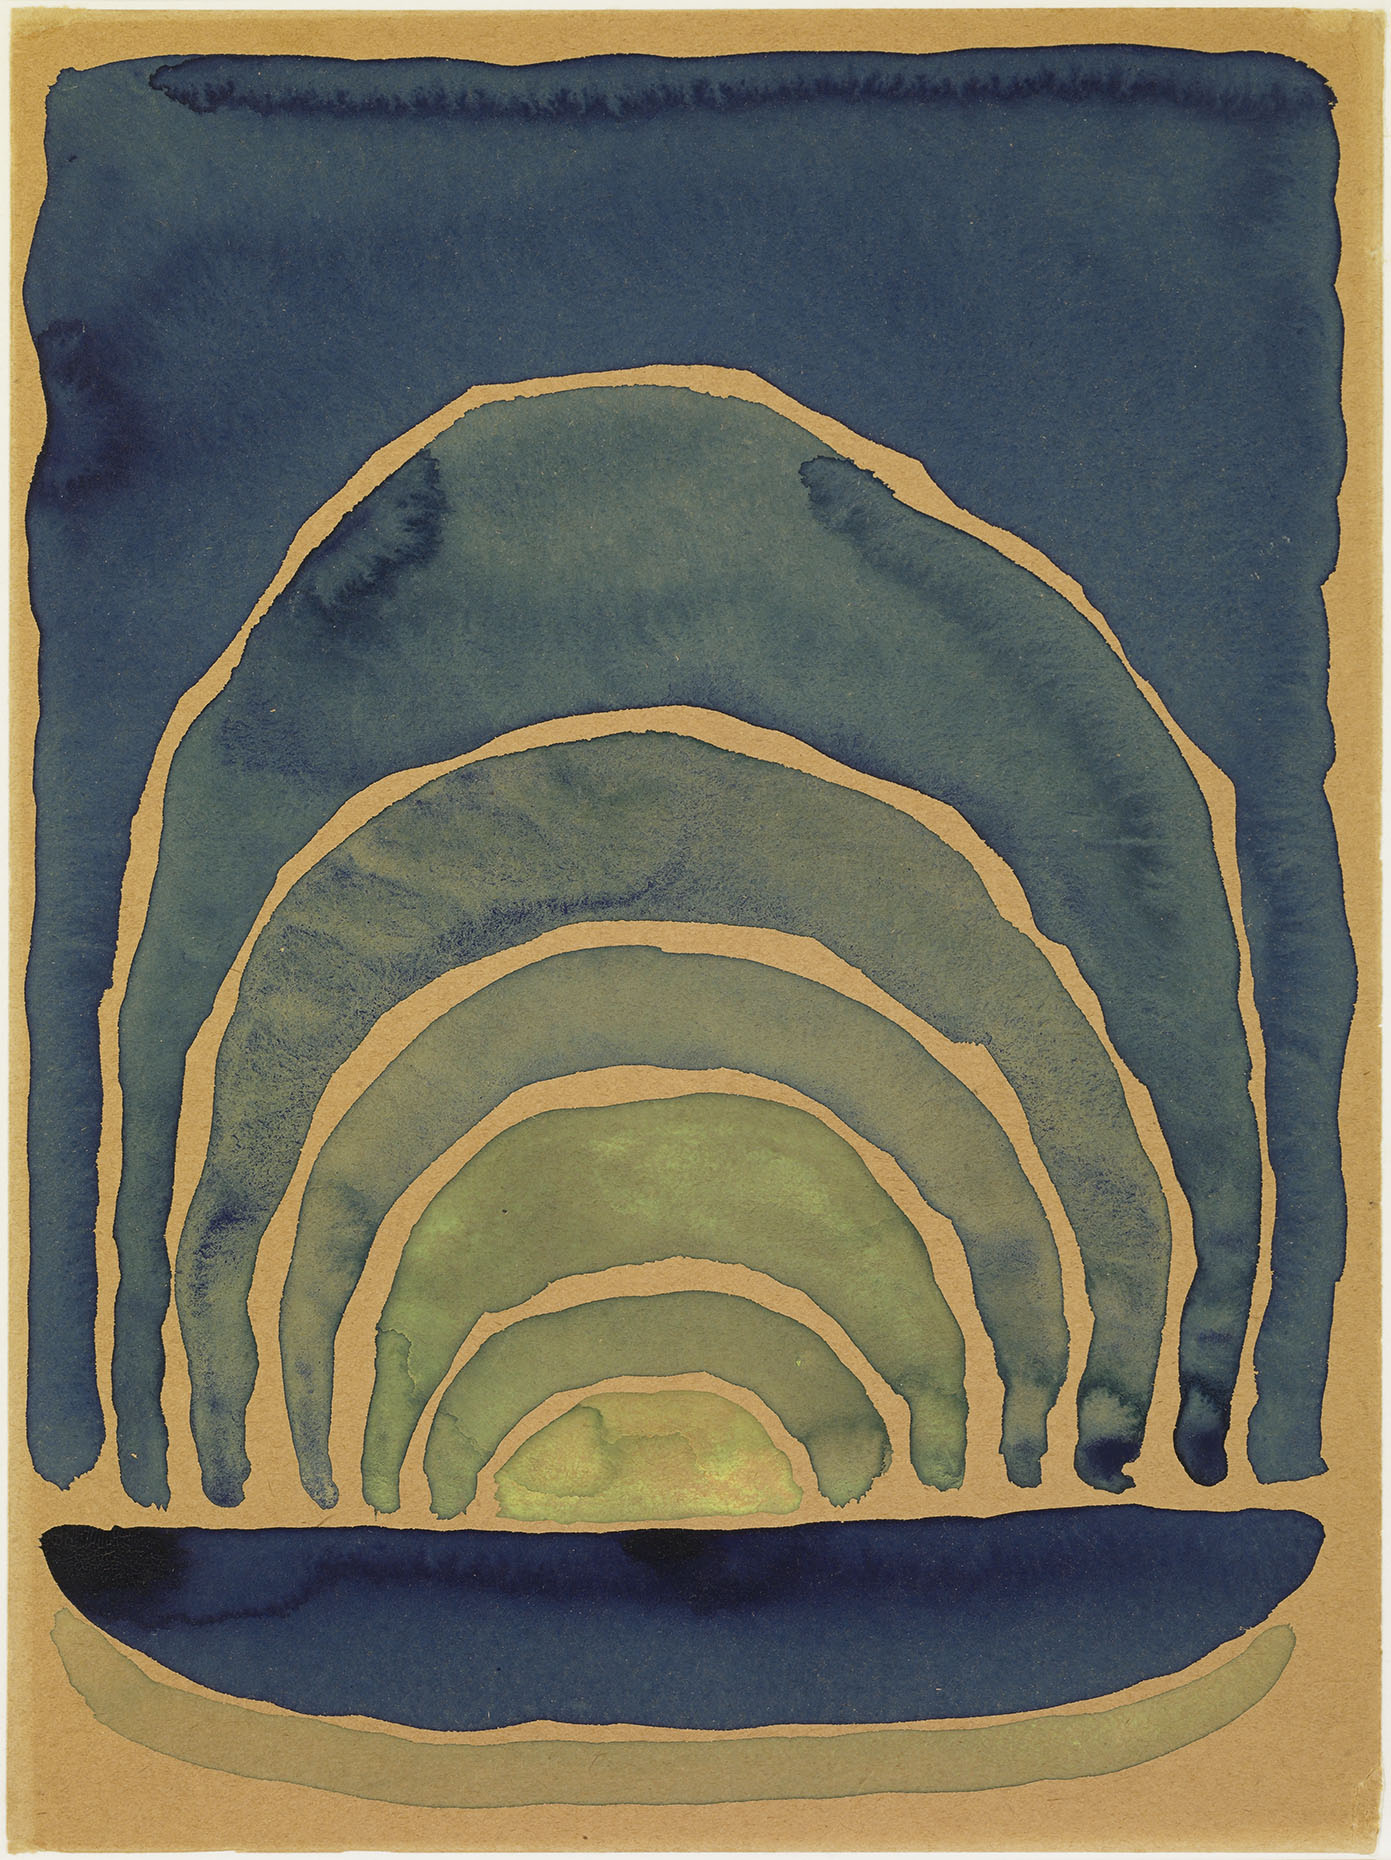 Georgia O'Keeffe (1887–1986). "Light Coming on the Plains No. I," 1917. Watercolor on newsprint paper. 11 7/8 x 8 7/8 inches. Amon Carter Museum of American Art, Fort Worth, Texas.